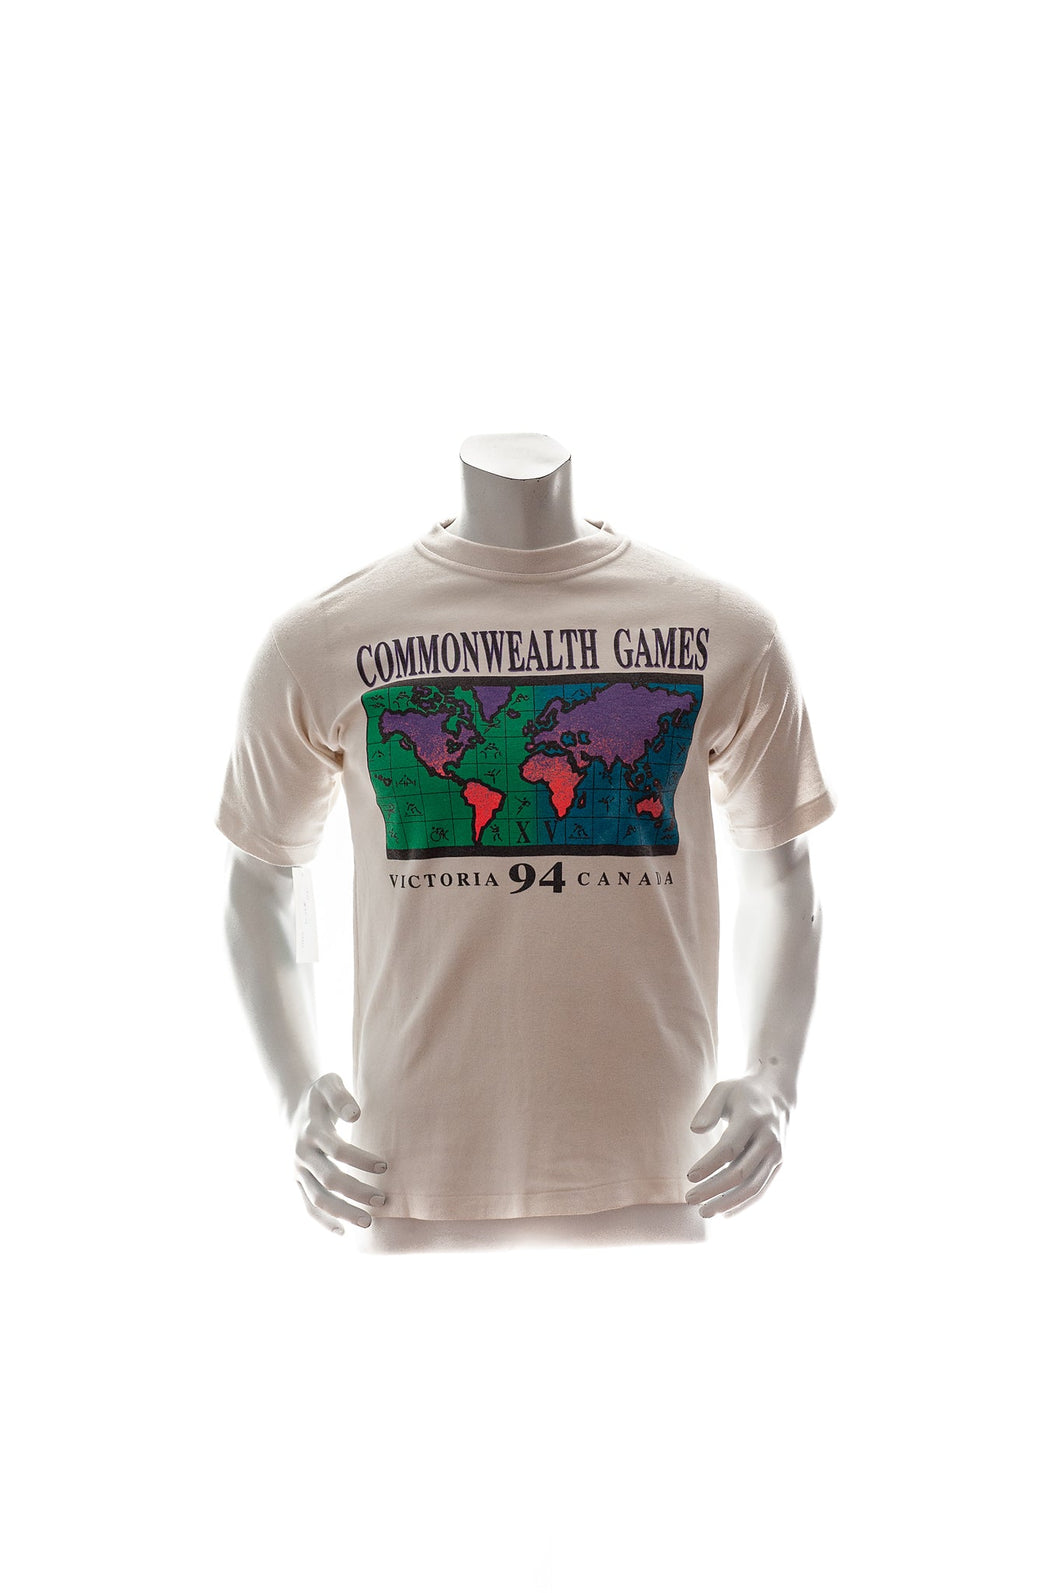 Vintage 1994 Commonwealth Games Single Stitch T-Shirt Mens Small